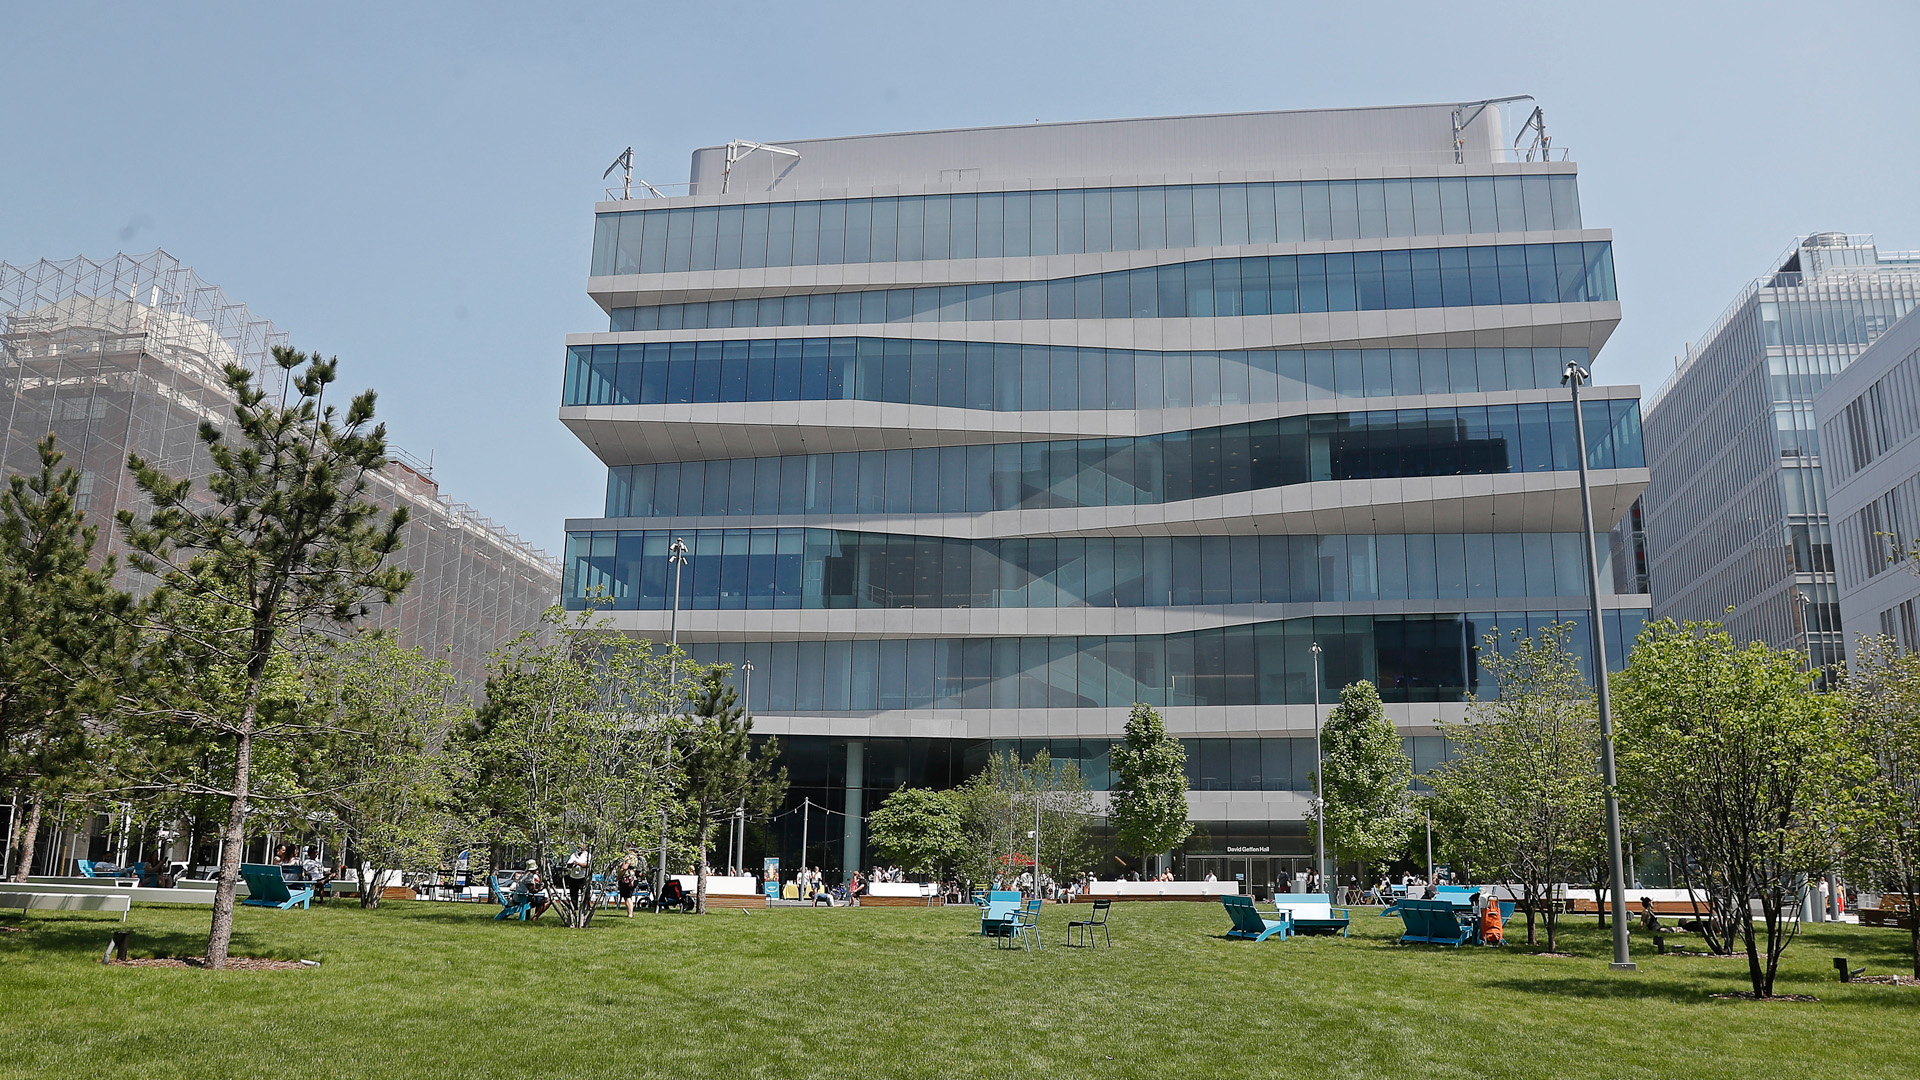 A view of The Square, a grassy green space with lawn chairs out, in front of David Geffen Hall.